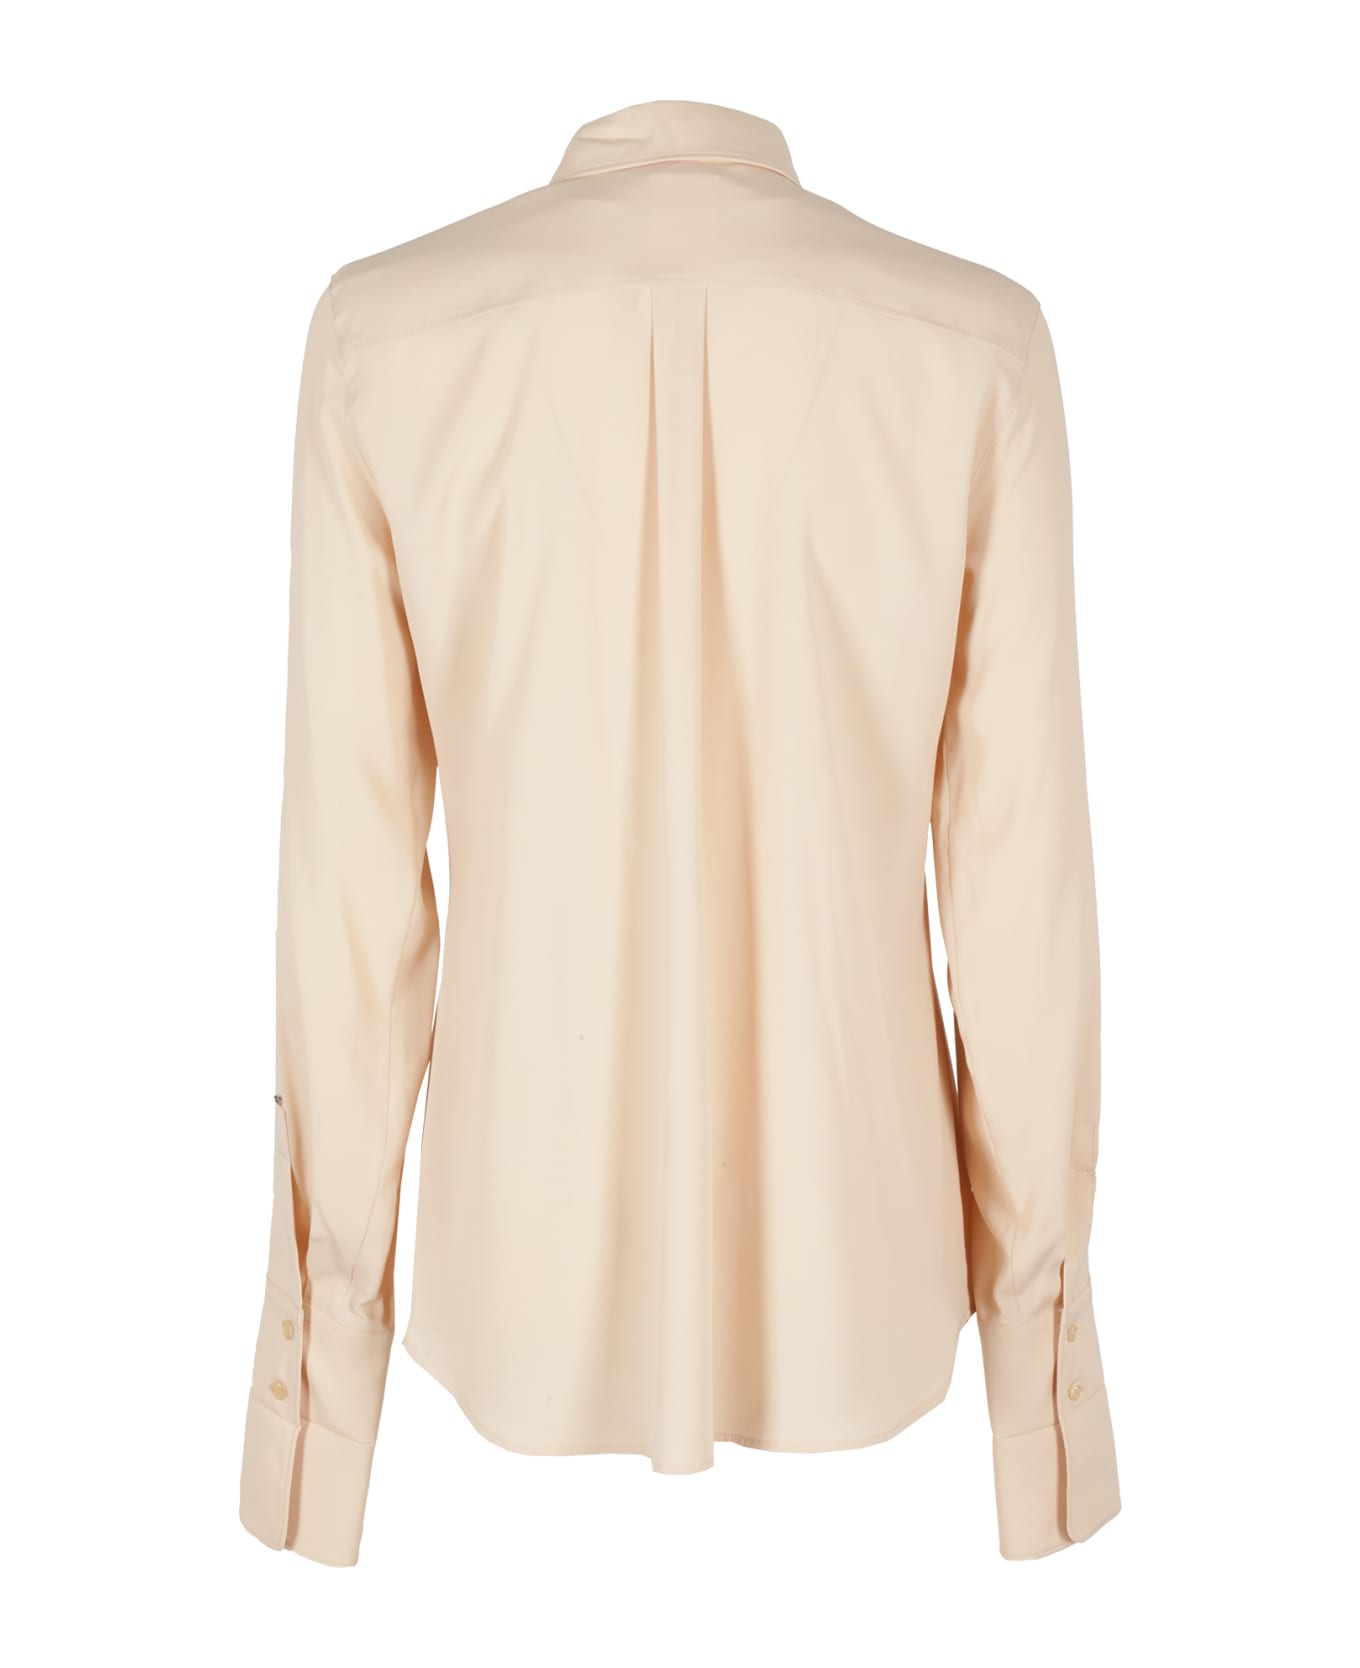 SportMax Buttoned Long-sleeved Shirt - Cipria シャツ